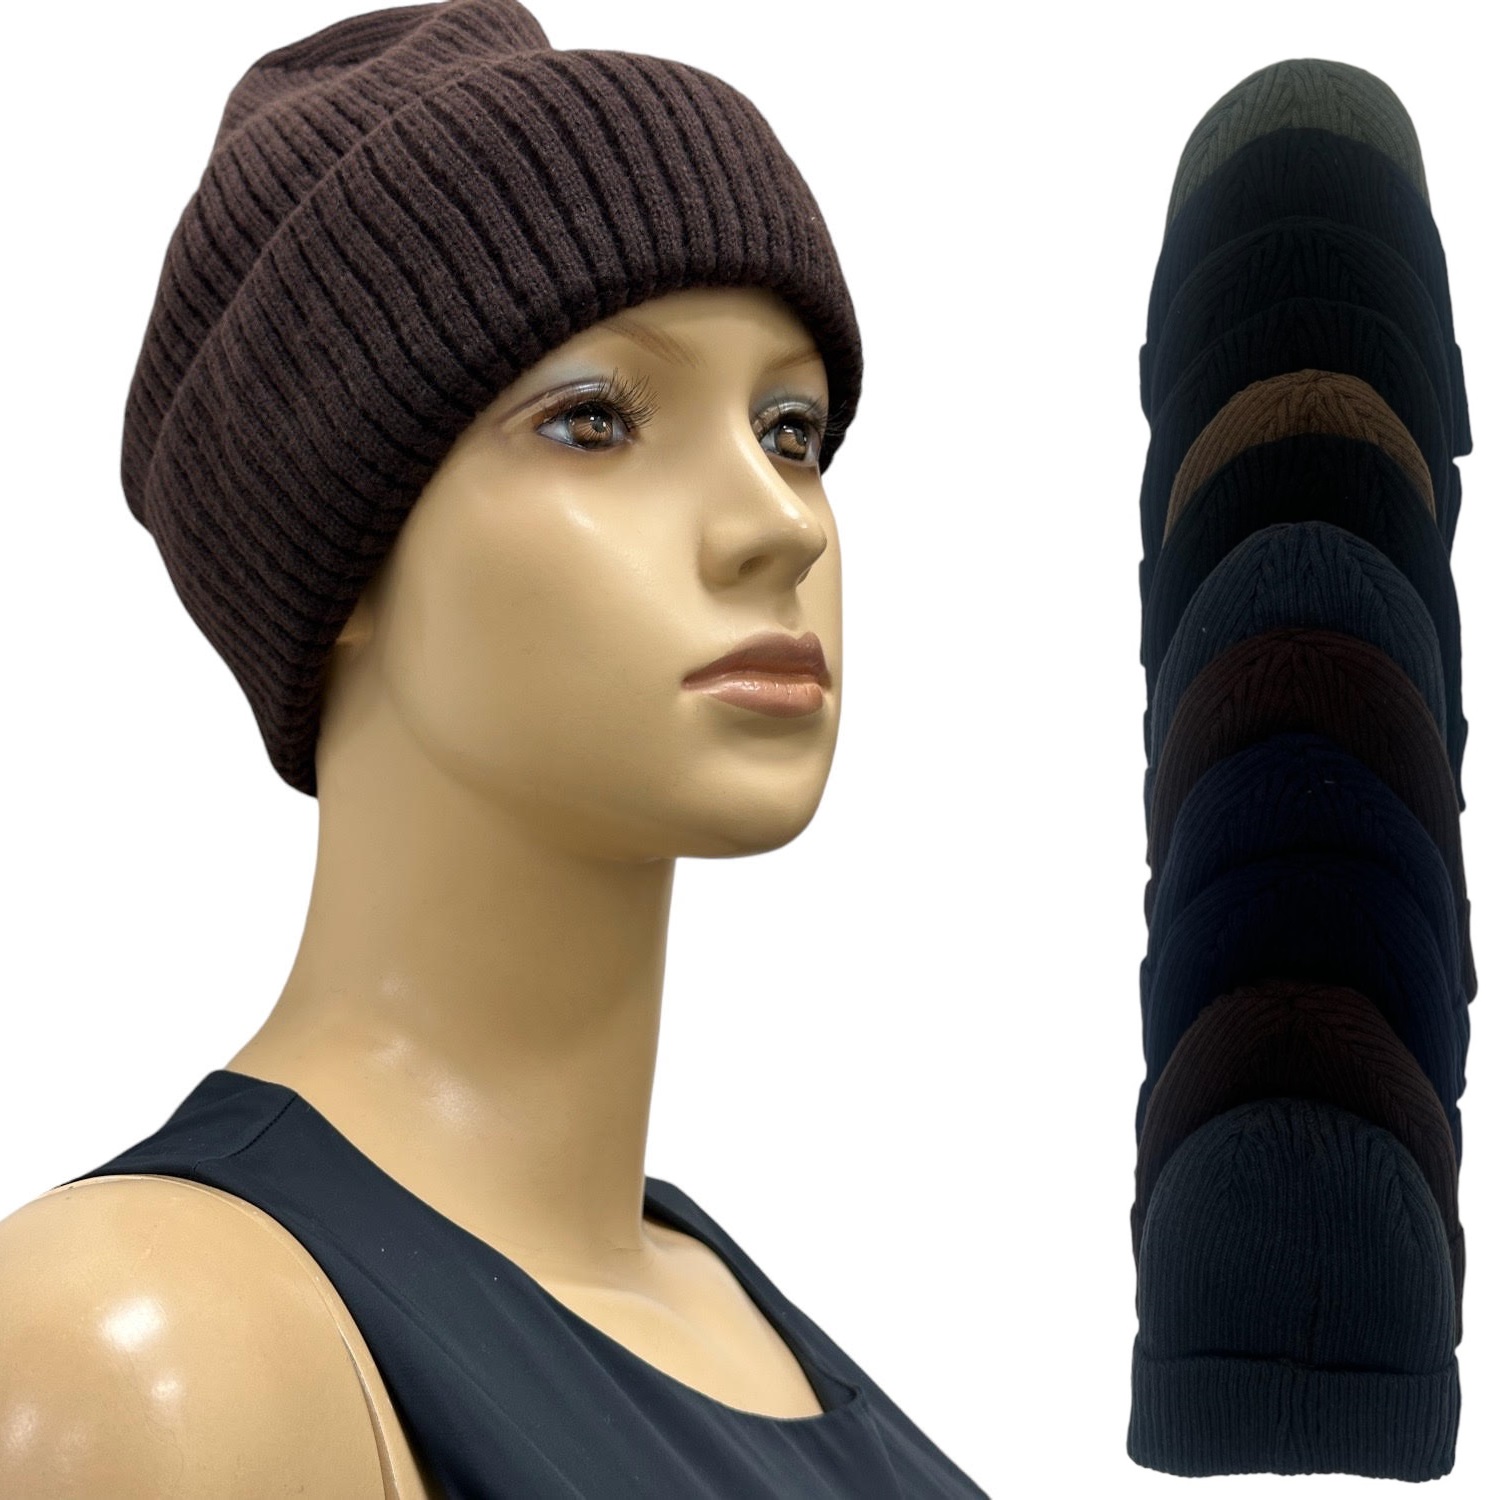 Cable knit Fleece lined Hats HY1827 (7 COLORS 1 Doz)